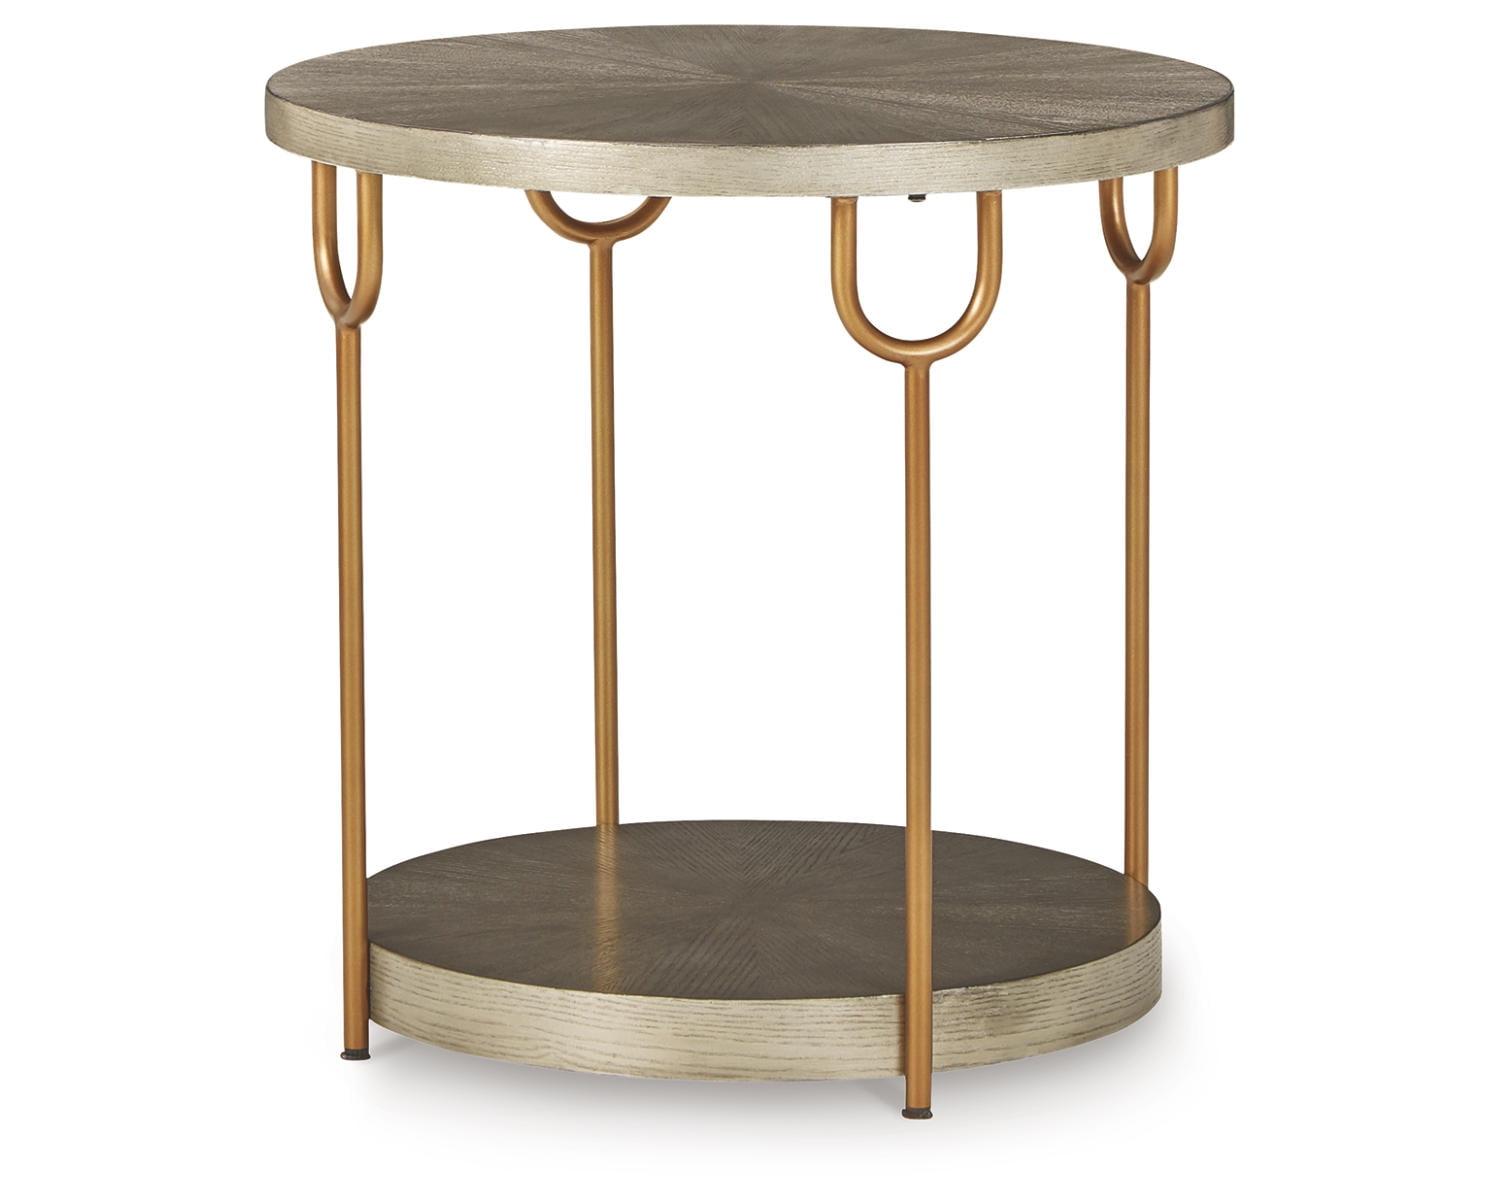 Contemporary Beige Wood & Gold Metal Round End Table 24"